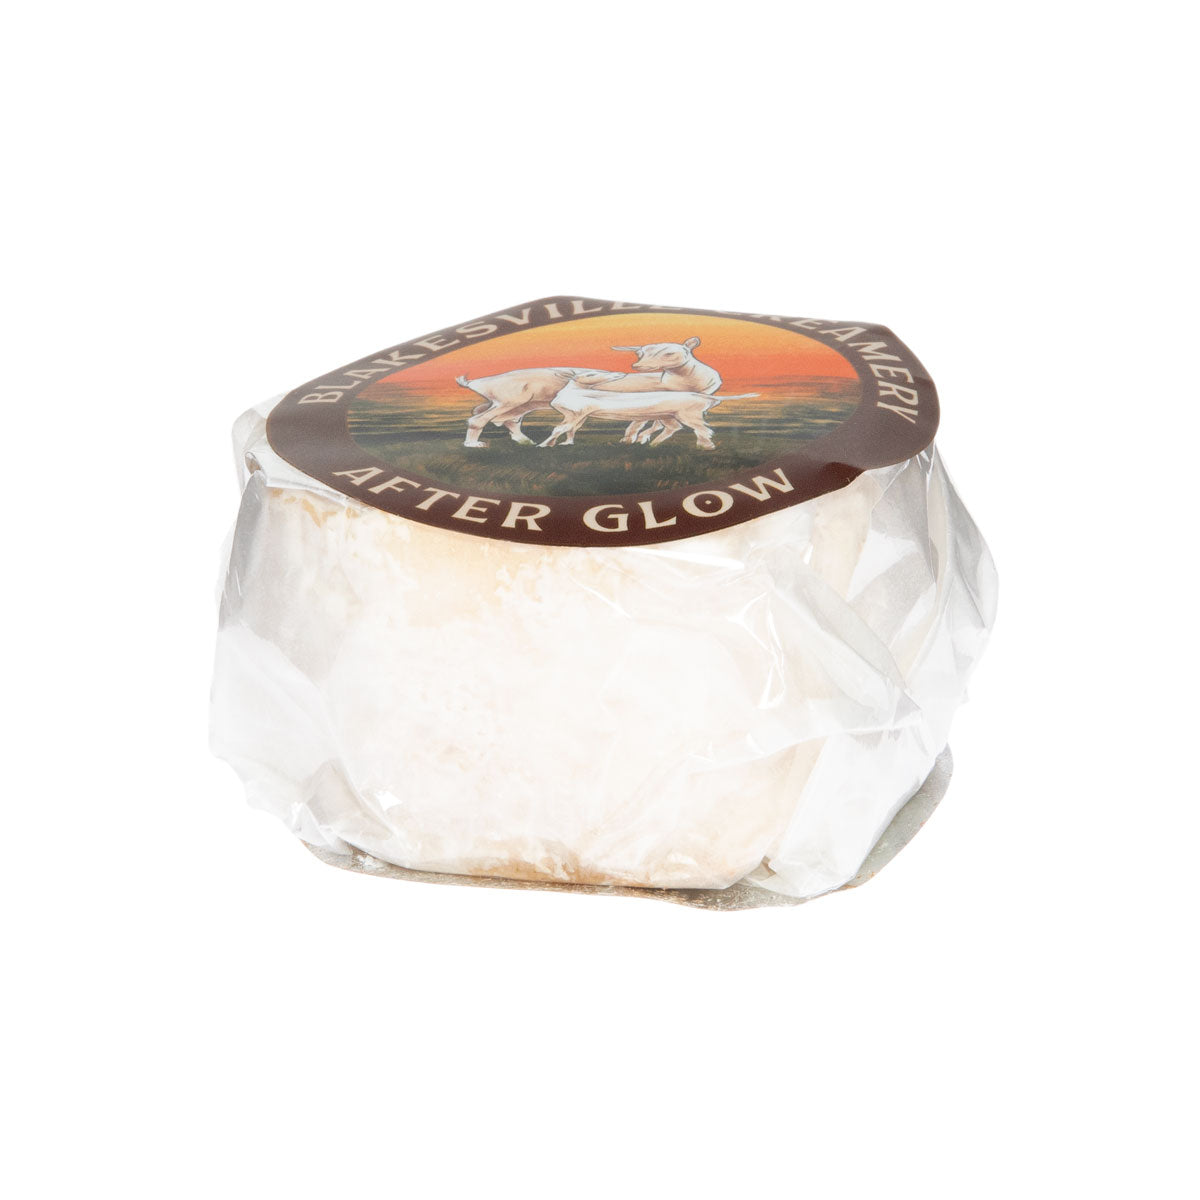 Blakesville Creamery Afterglow Cheese 5 Oz Bag